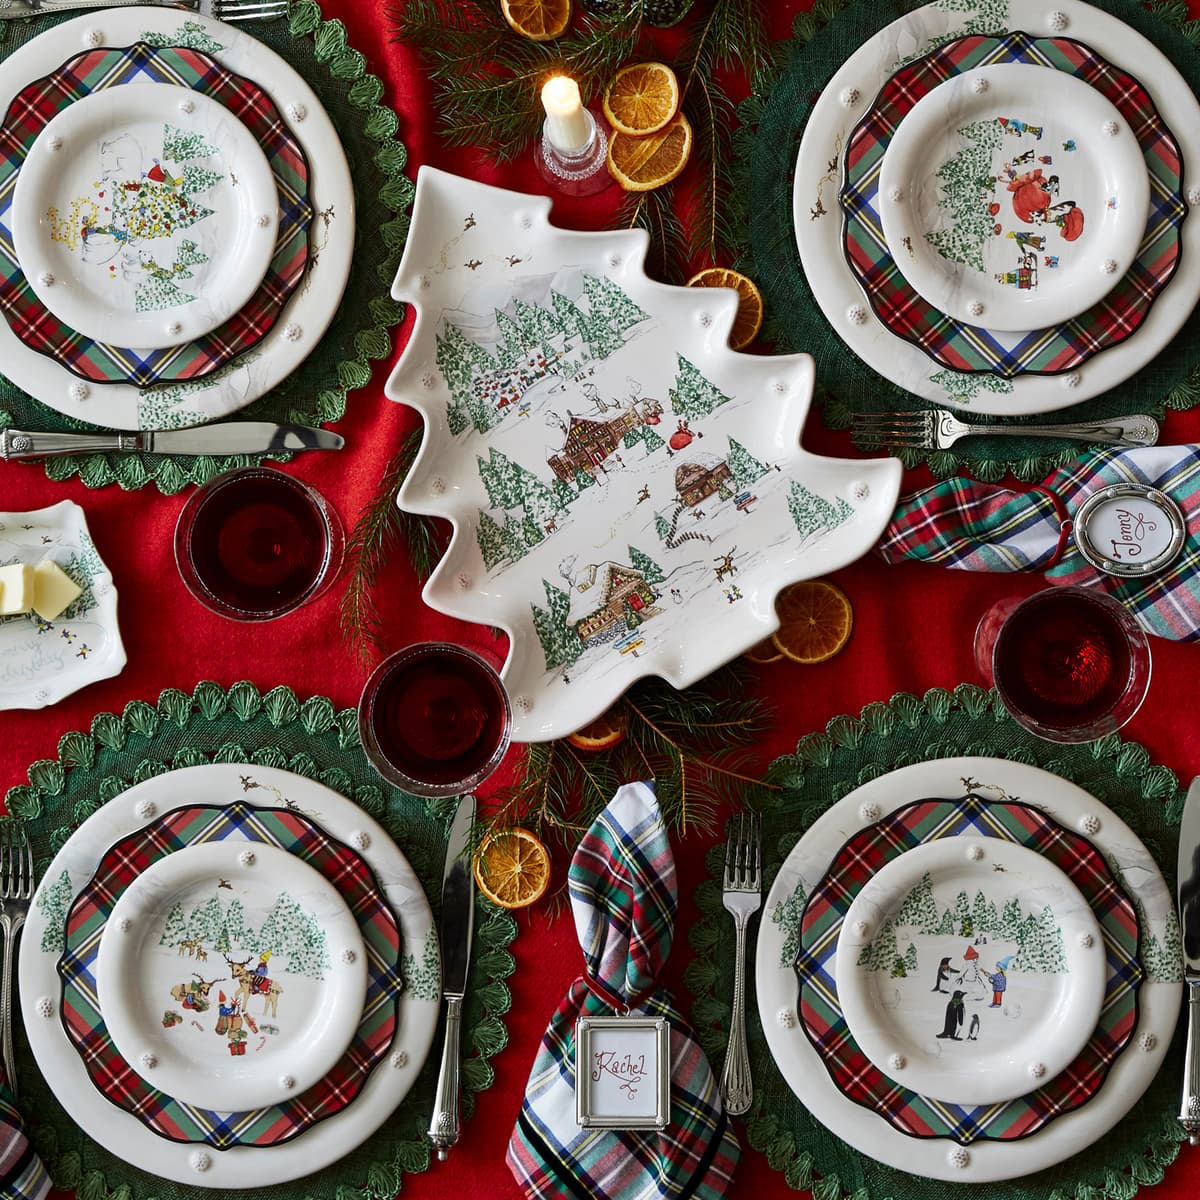 Berry & Thread North Pole stacks playfully with the Stewart Tartan salad plates.